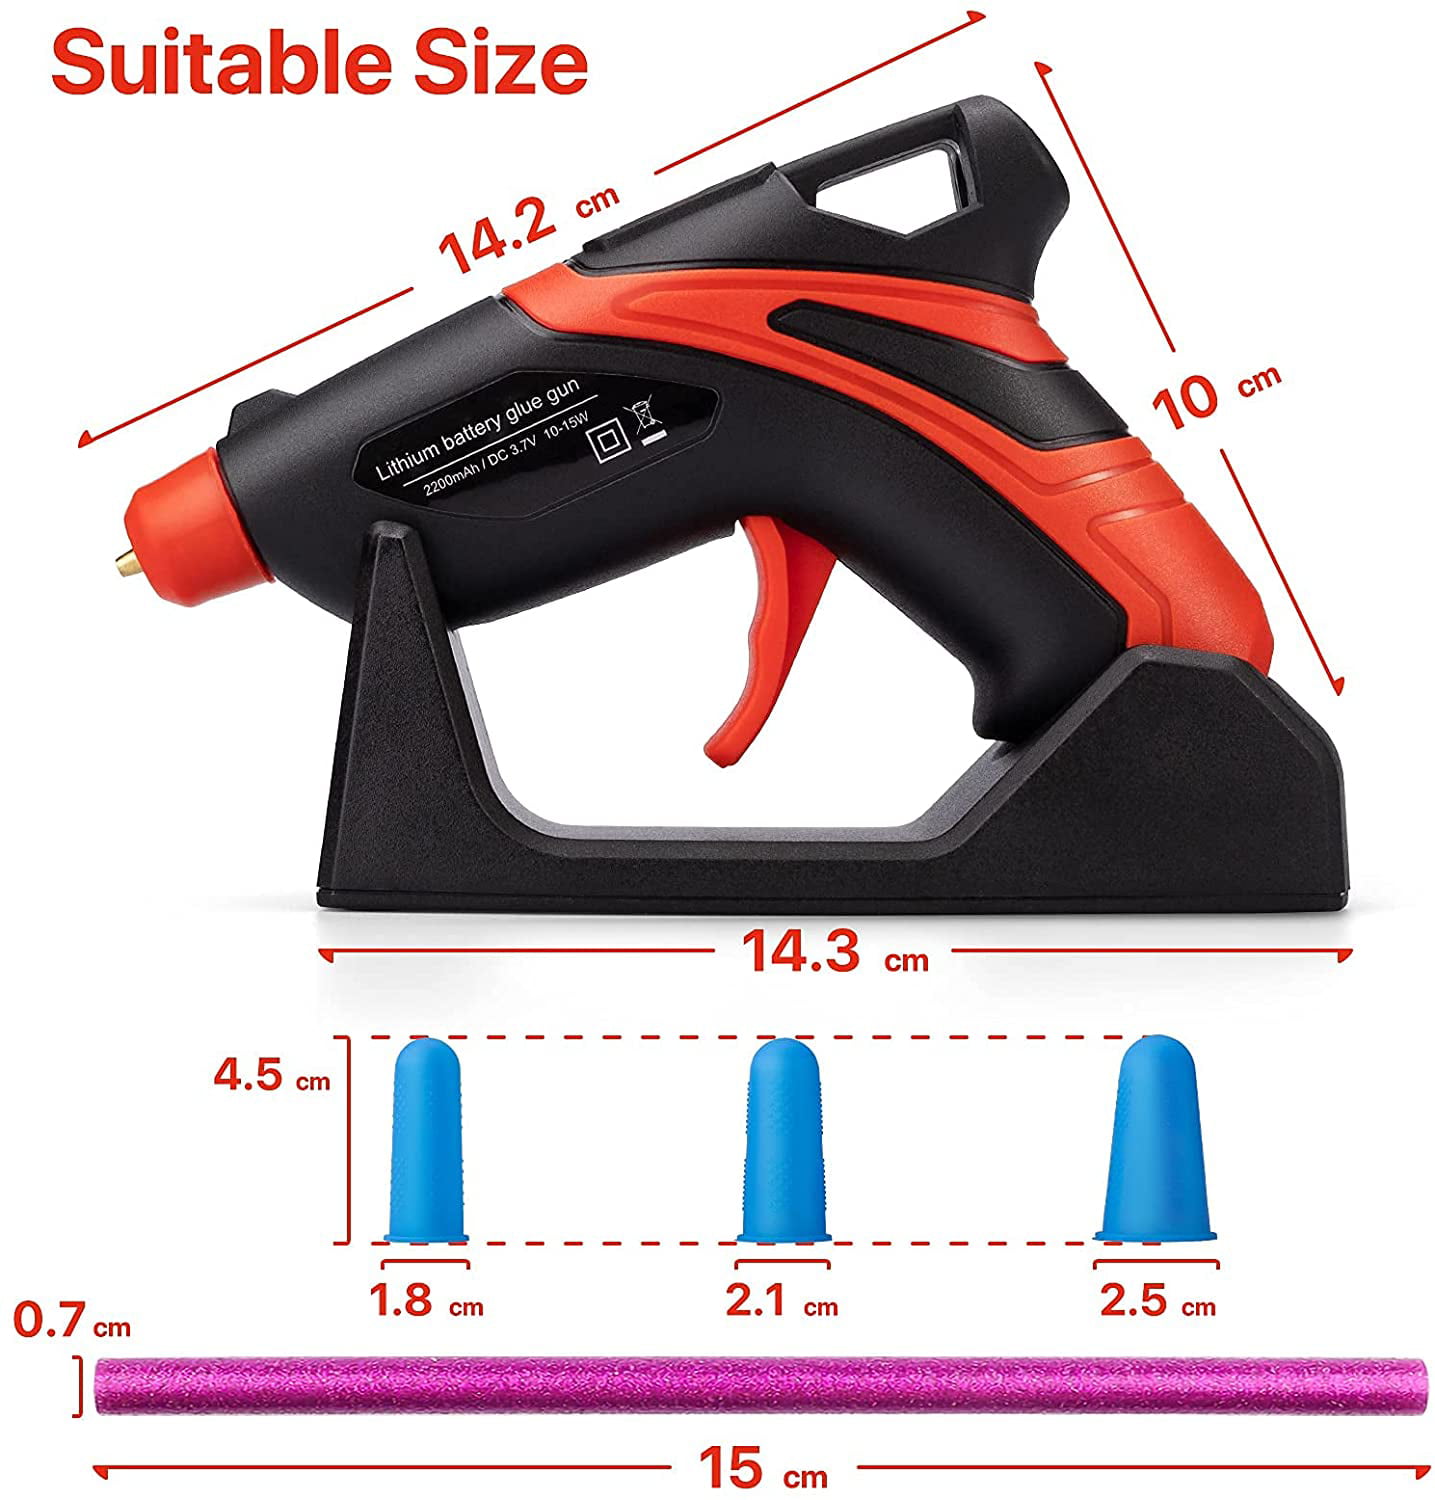 Hot Glue Gun 12V Cordless, 15s Fast Preheating Hot Glue Gun Kit, Mini  Wireless Rechargeable Glue Gun with 28 Piece Glue Sticks, For DIY Projects,  Arts, Crafts, Quick Repairs, and Home Decoration